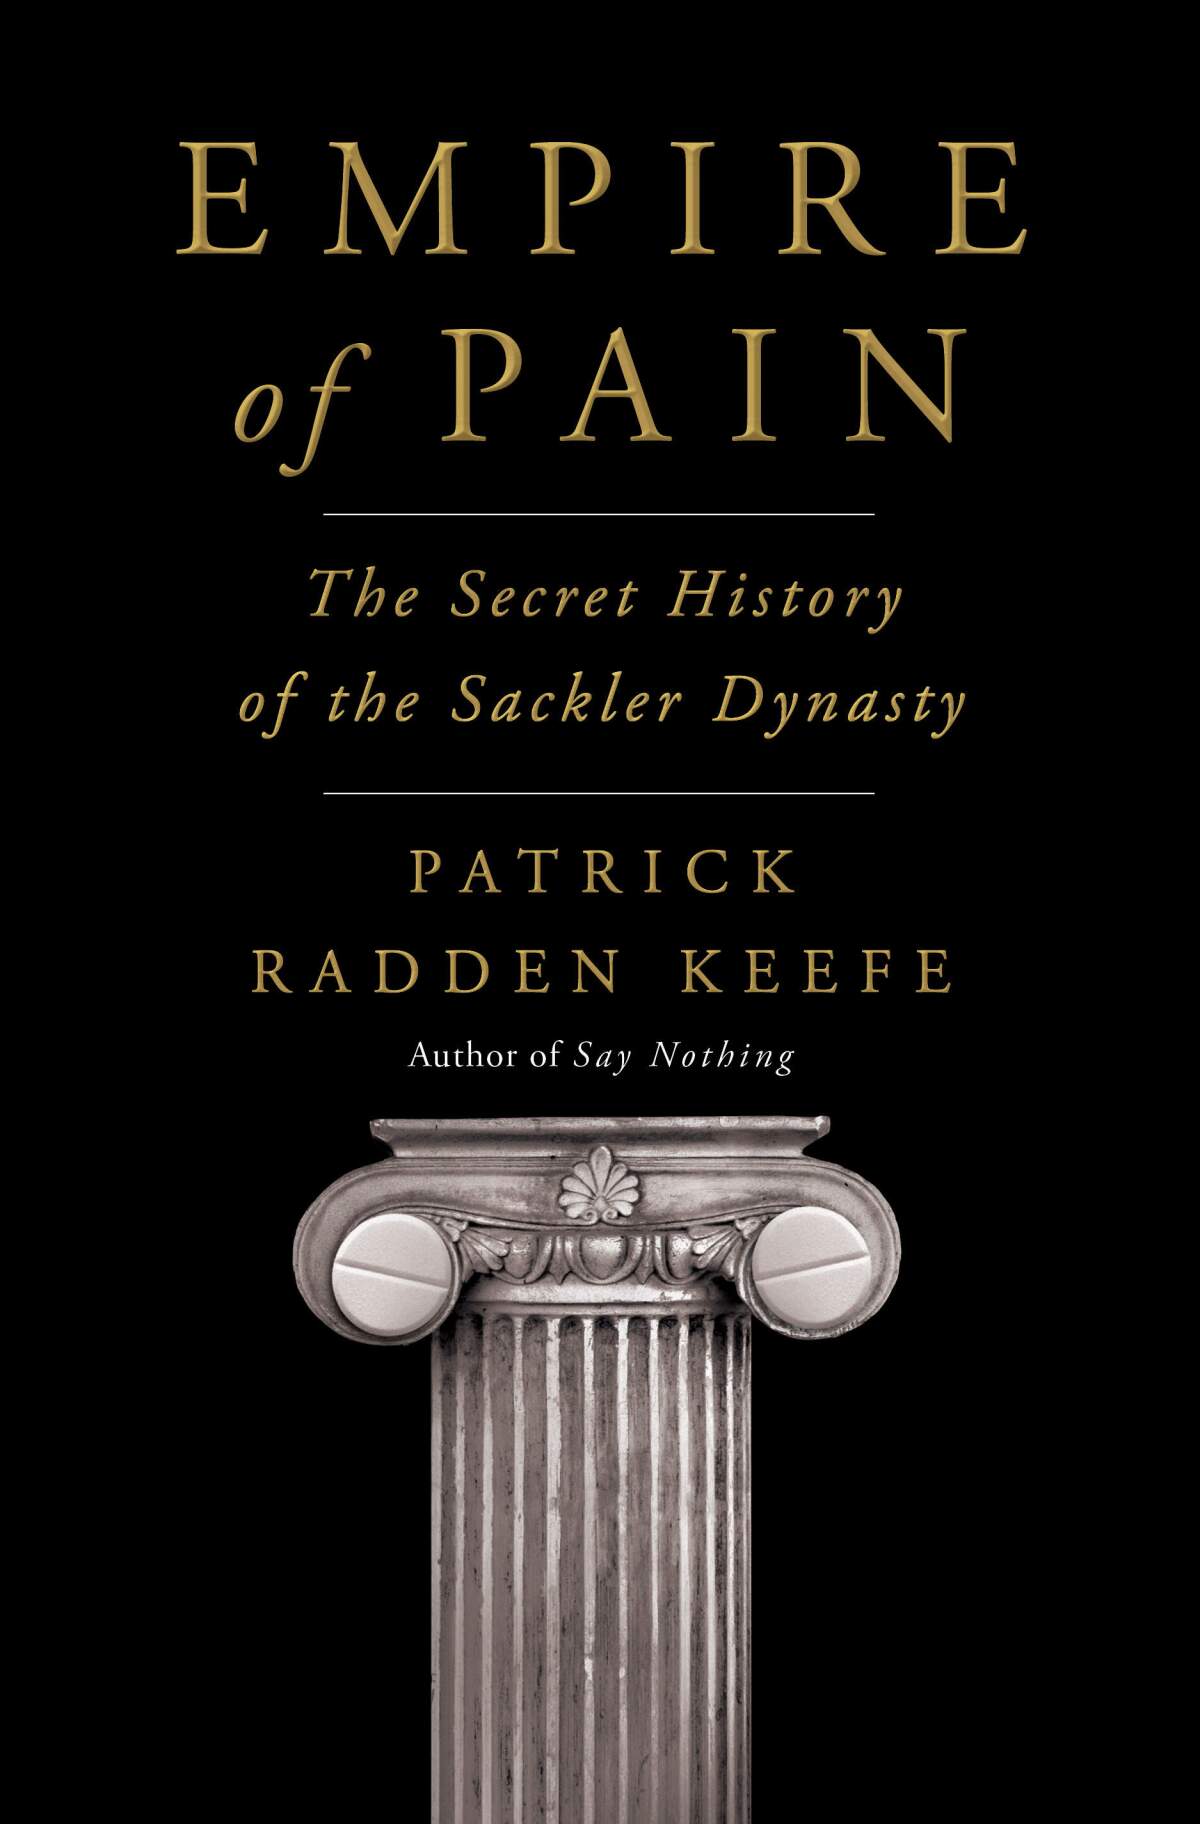 A book jacket showing an Ionic column with two pills in the scrolls